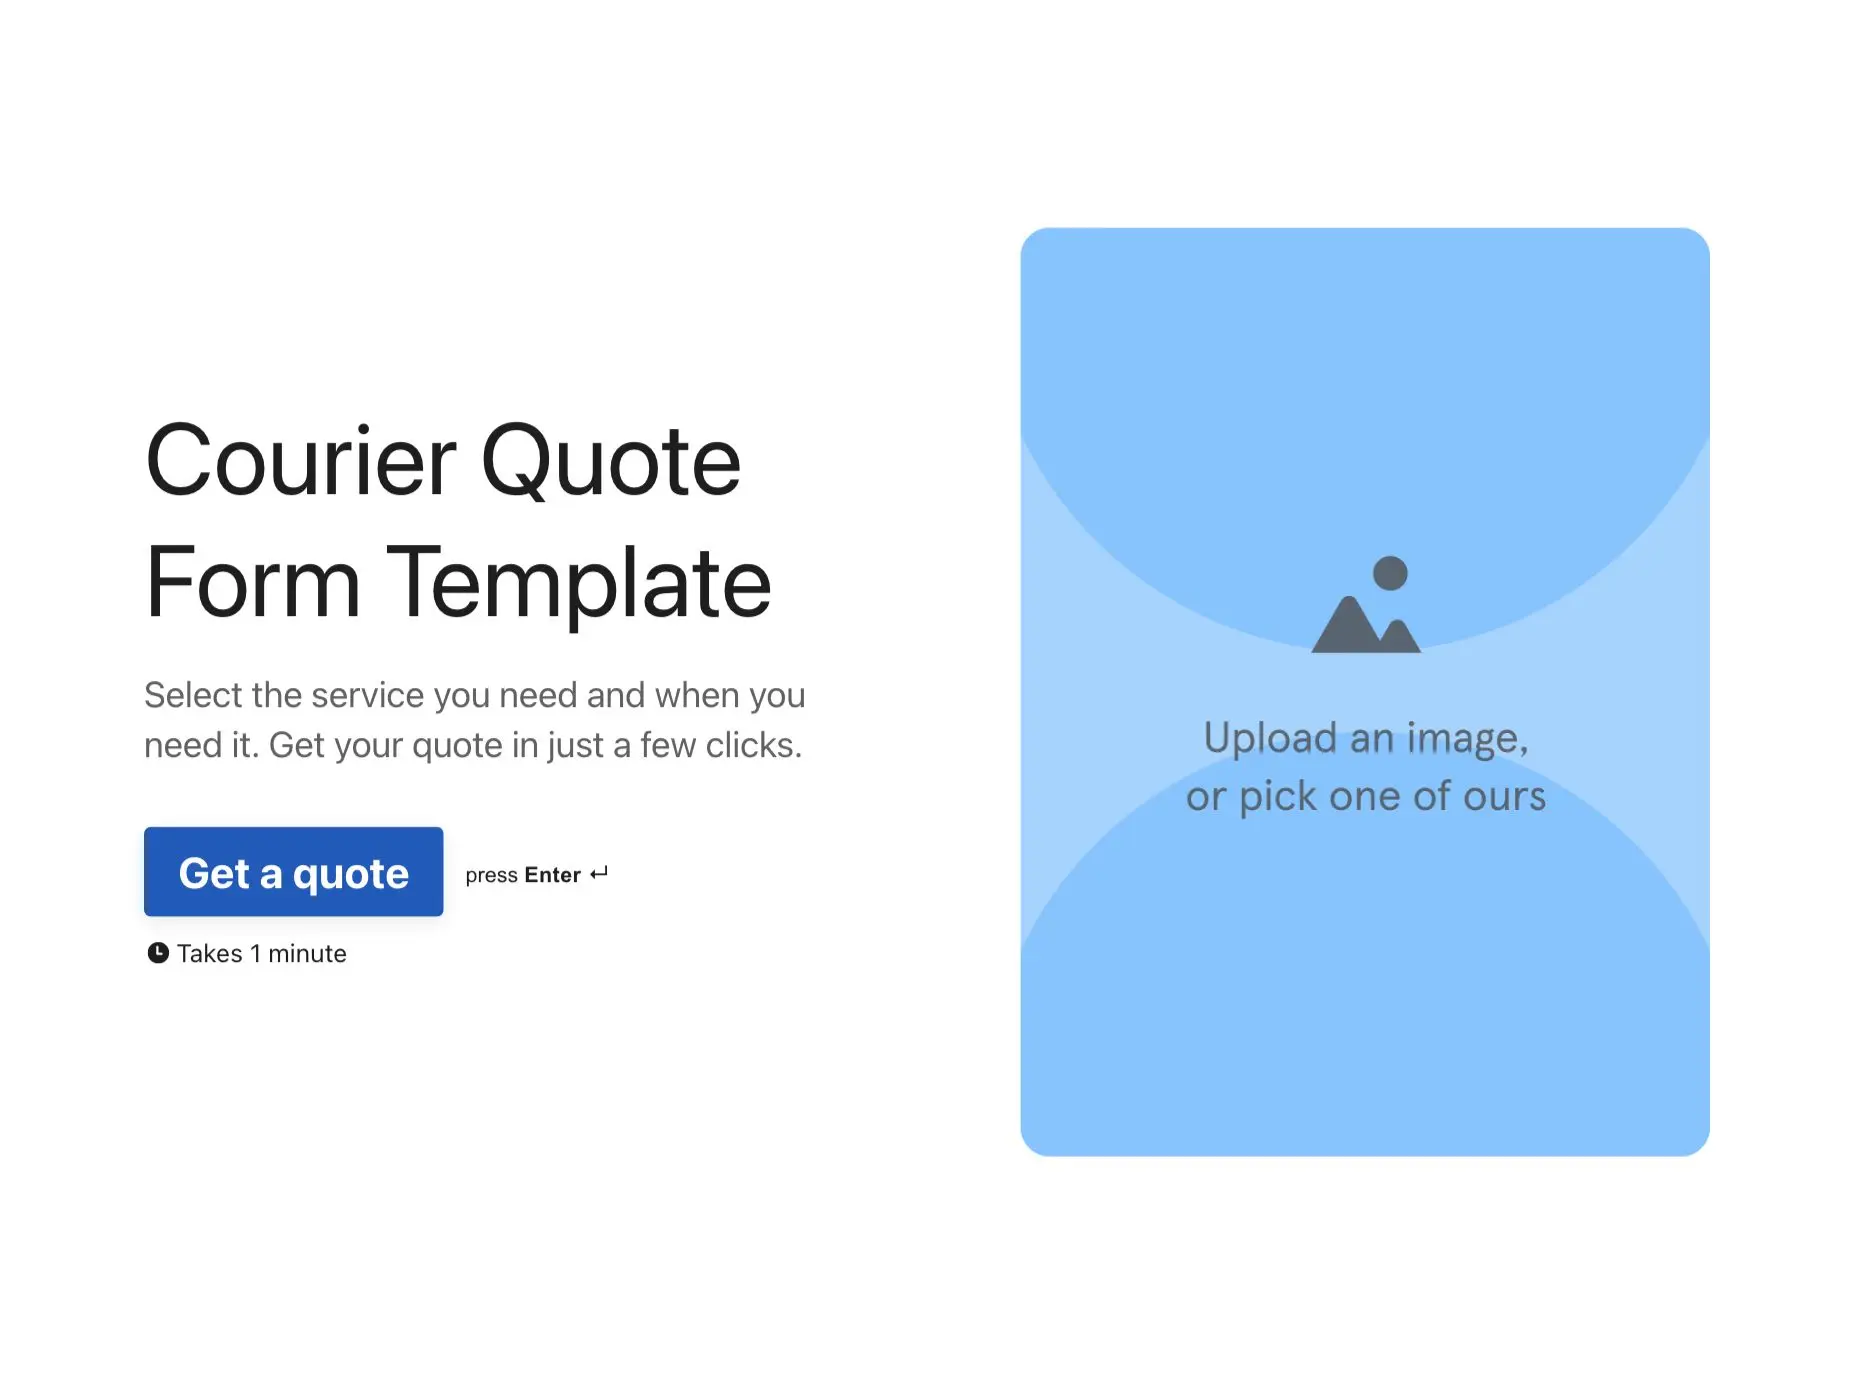 Courier Quote Form Template Hero